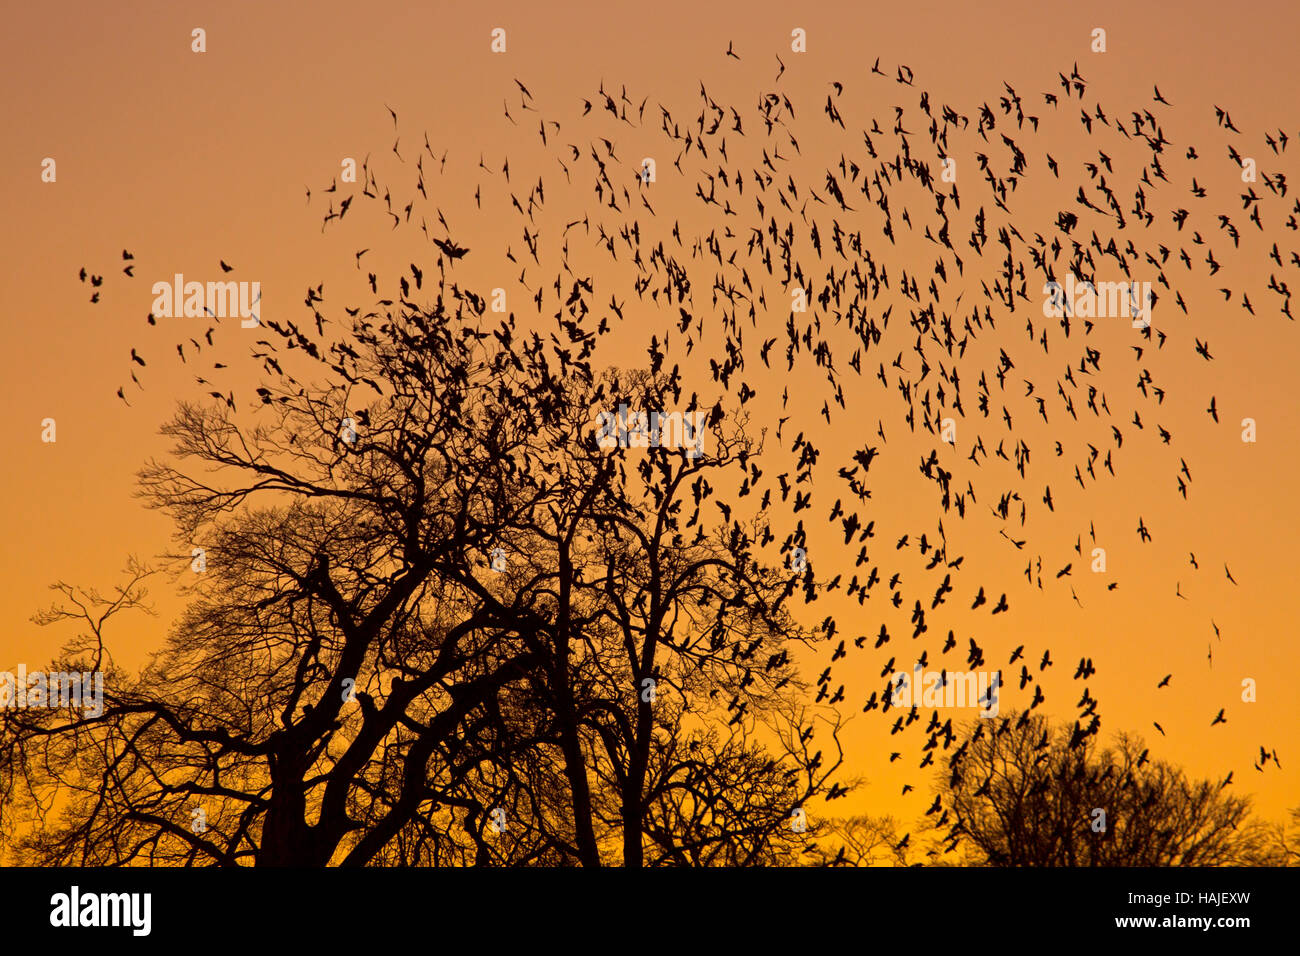 Jackdaws Corvus monedula going to roost and gathering before dark in beech trees Stock Photo